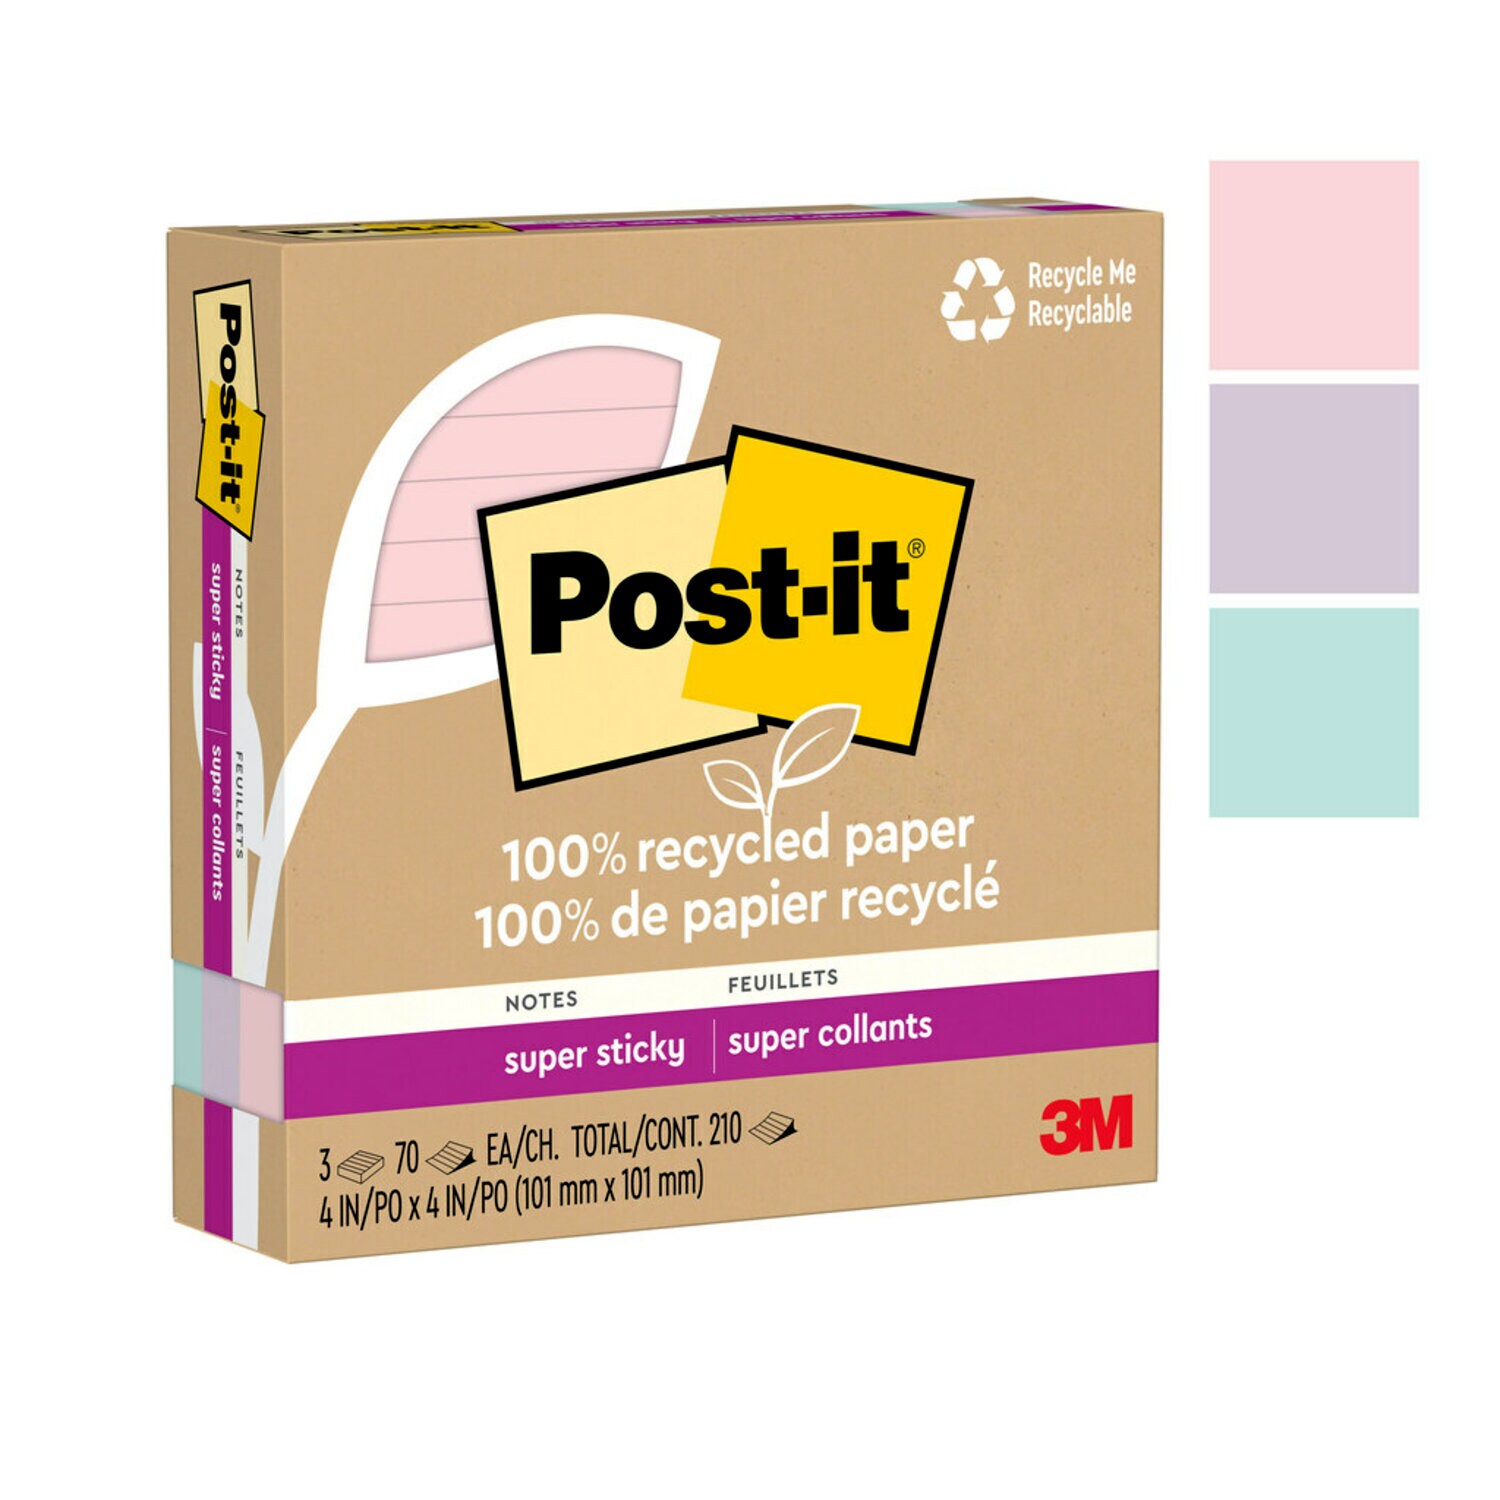 7100290323 - Post-it Super Sticky Recycled Notes 675R-3SSNRP, 4 in x 4 in (101 mm x 101 mm)